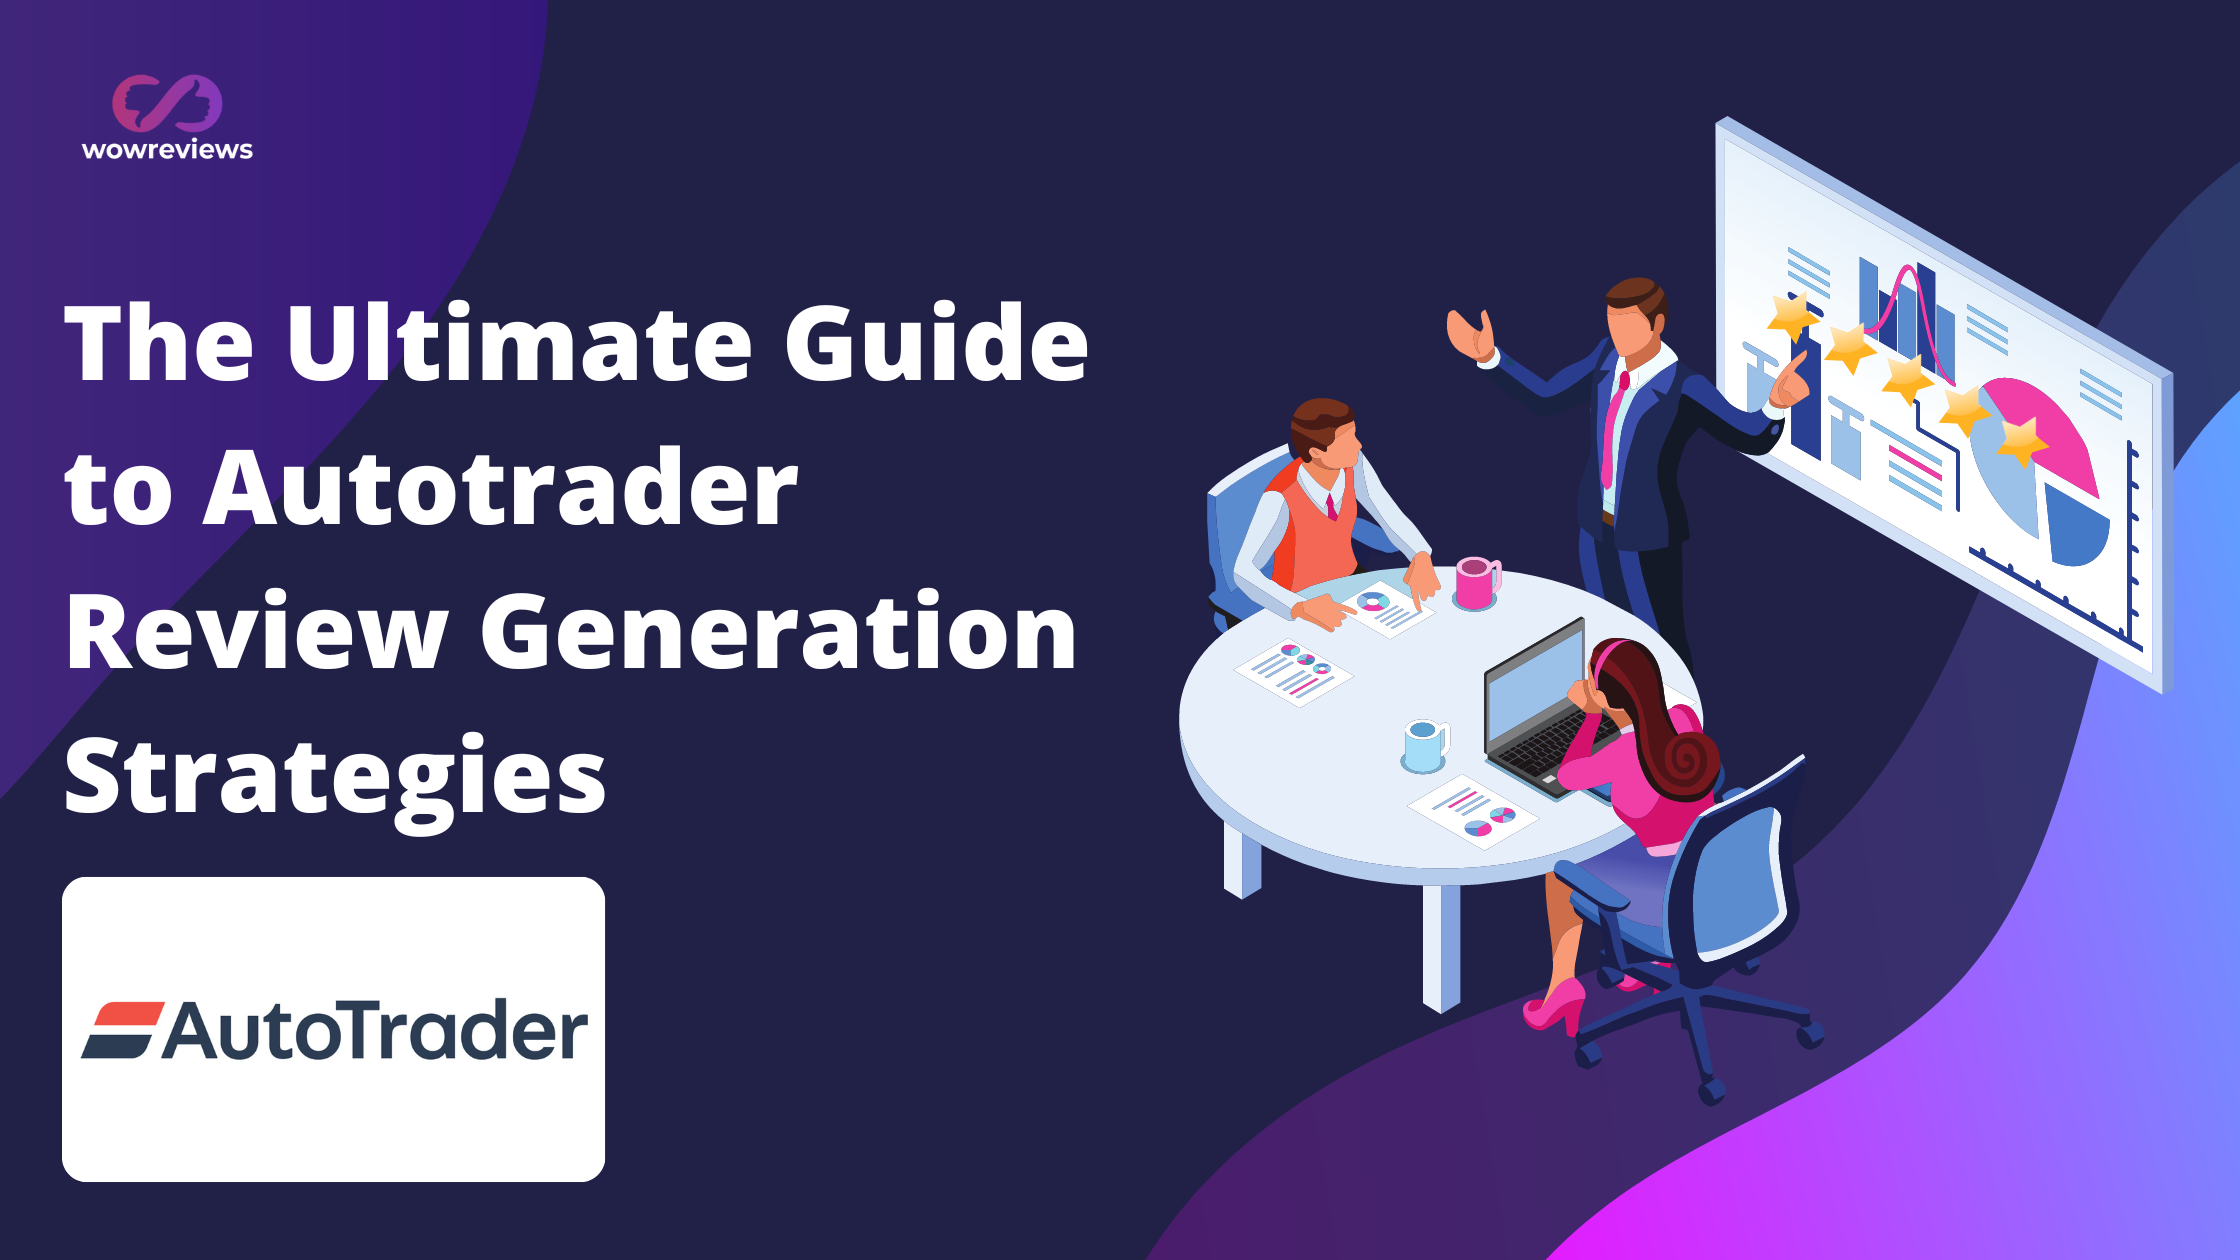 The Ultimate Guide to Autotrader Review Generation Strategies